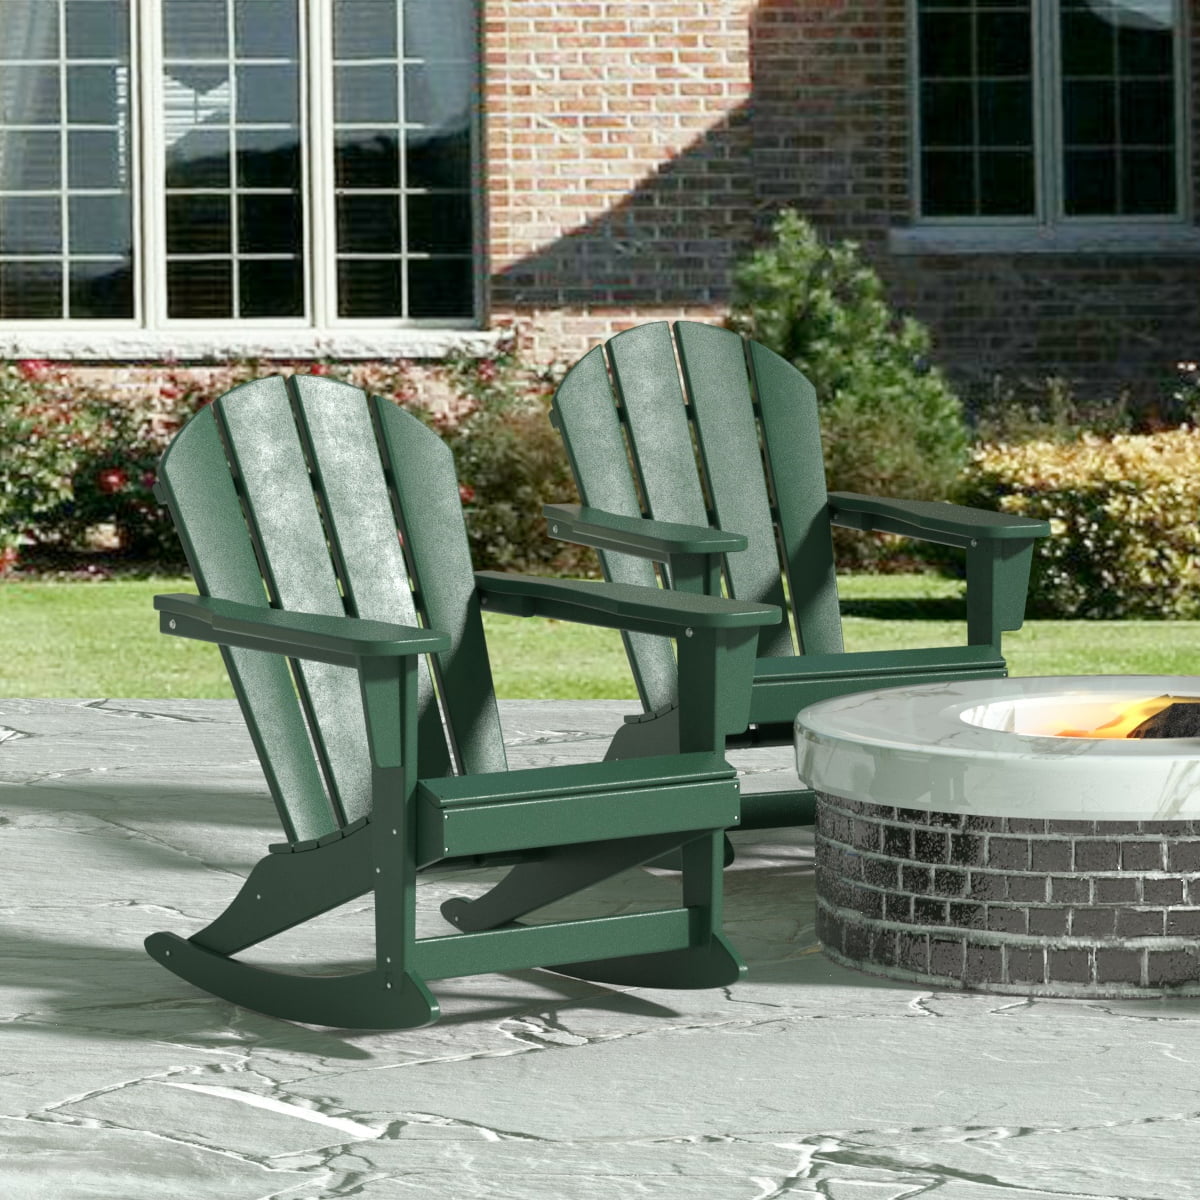 GARDEN Plastic Adirondack Rocking Chair for Outdoor Patio Porch Seating, Dark Green - image 1 of 7